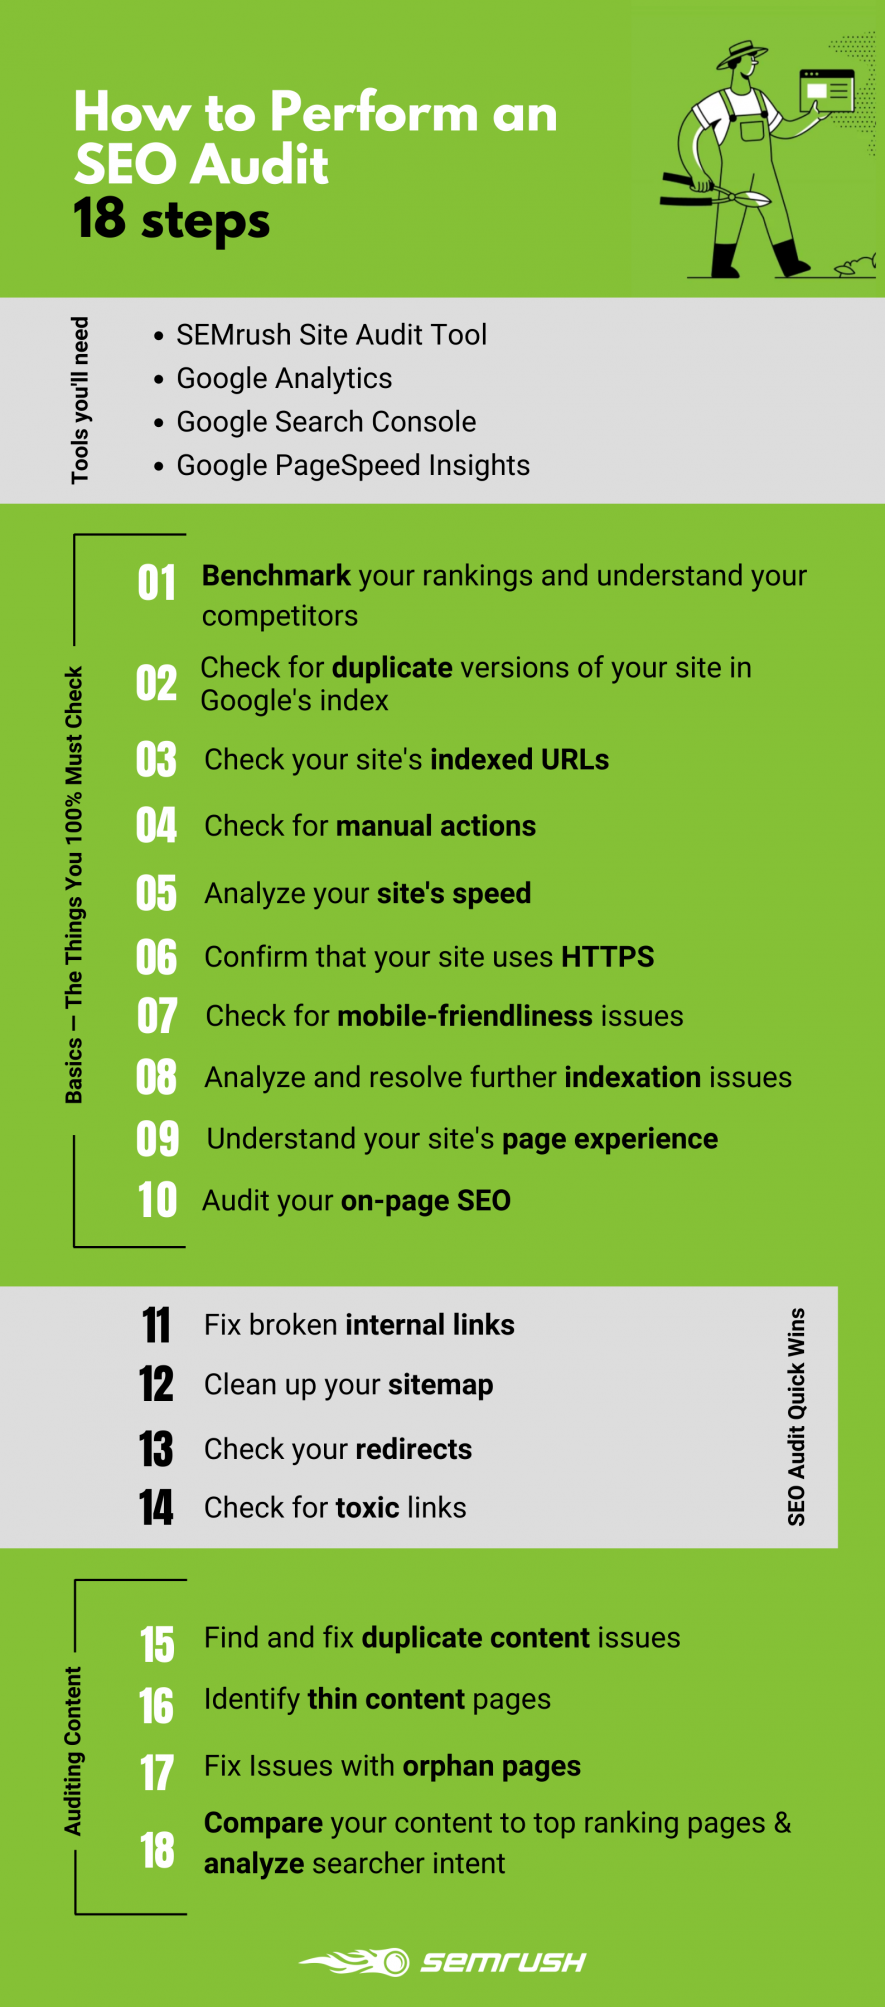 how to perform an SEO audit checklist